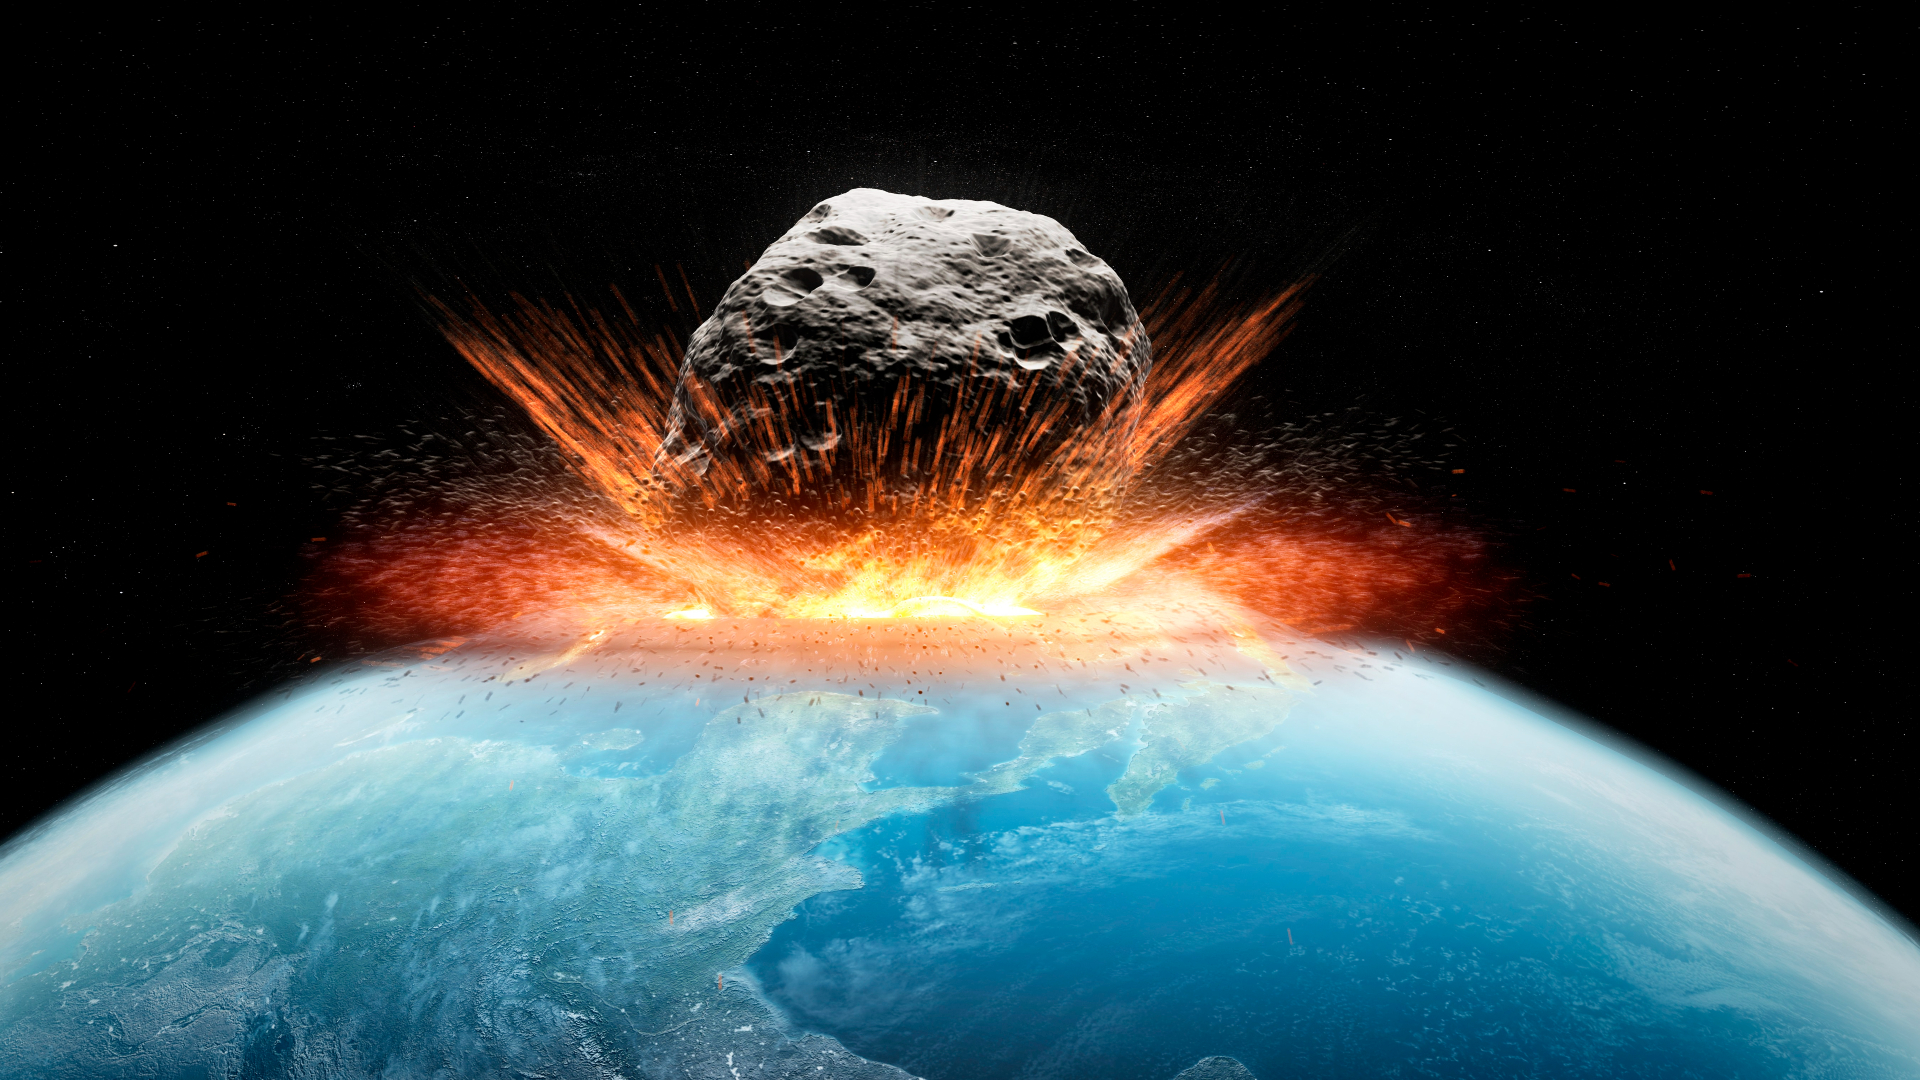 How Frequently Do Planets Like Earth Face Catastrophic Impacts and What Determines Their Size?